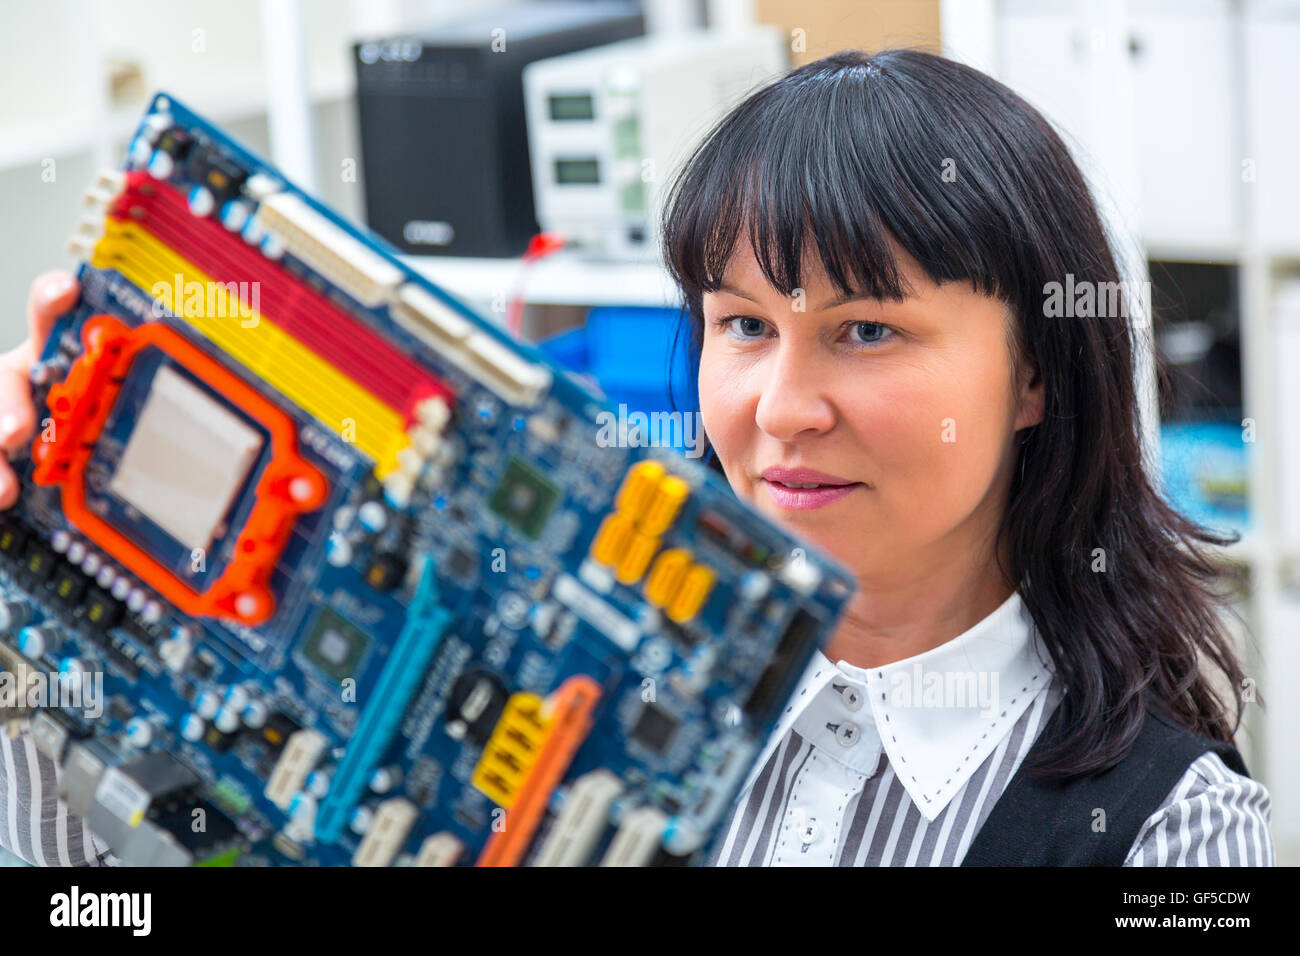 the development controller for CNC machines Stock Photo